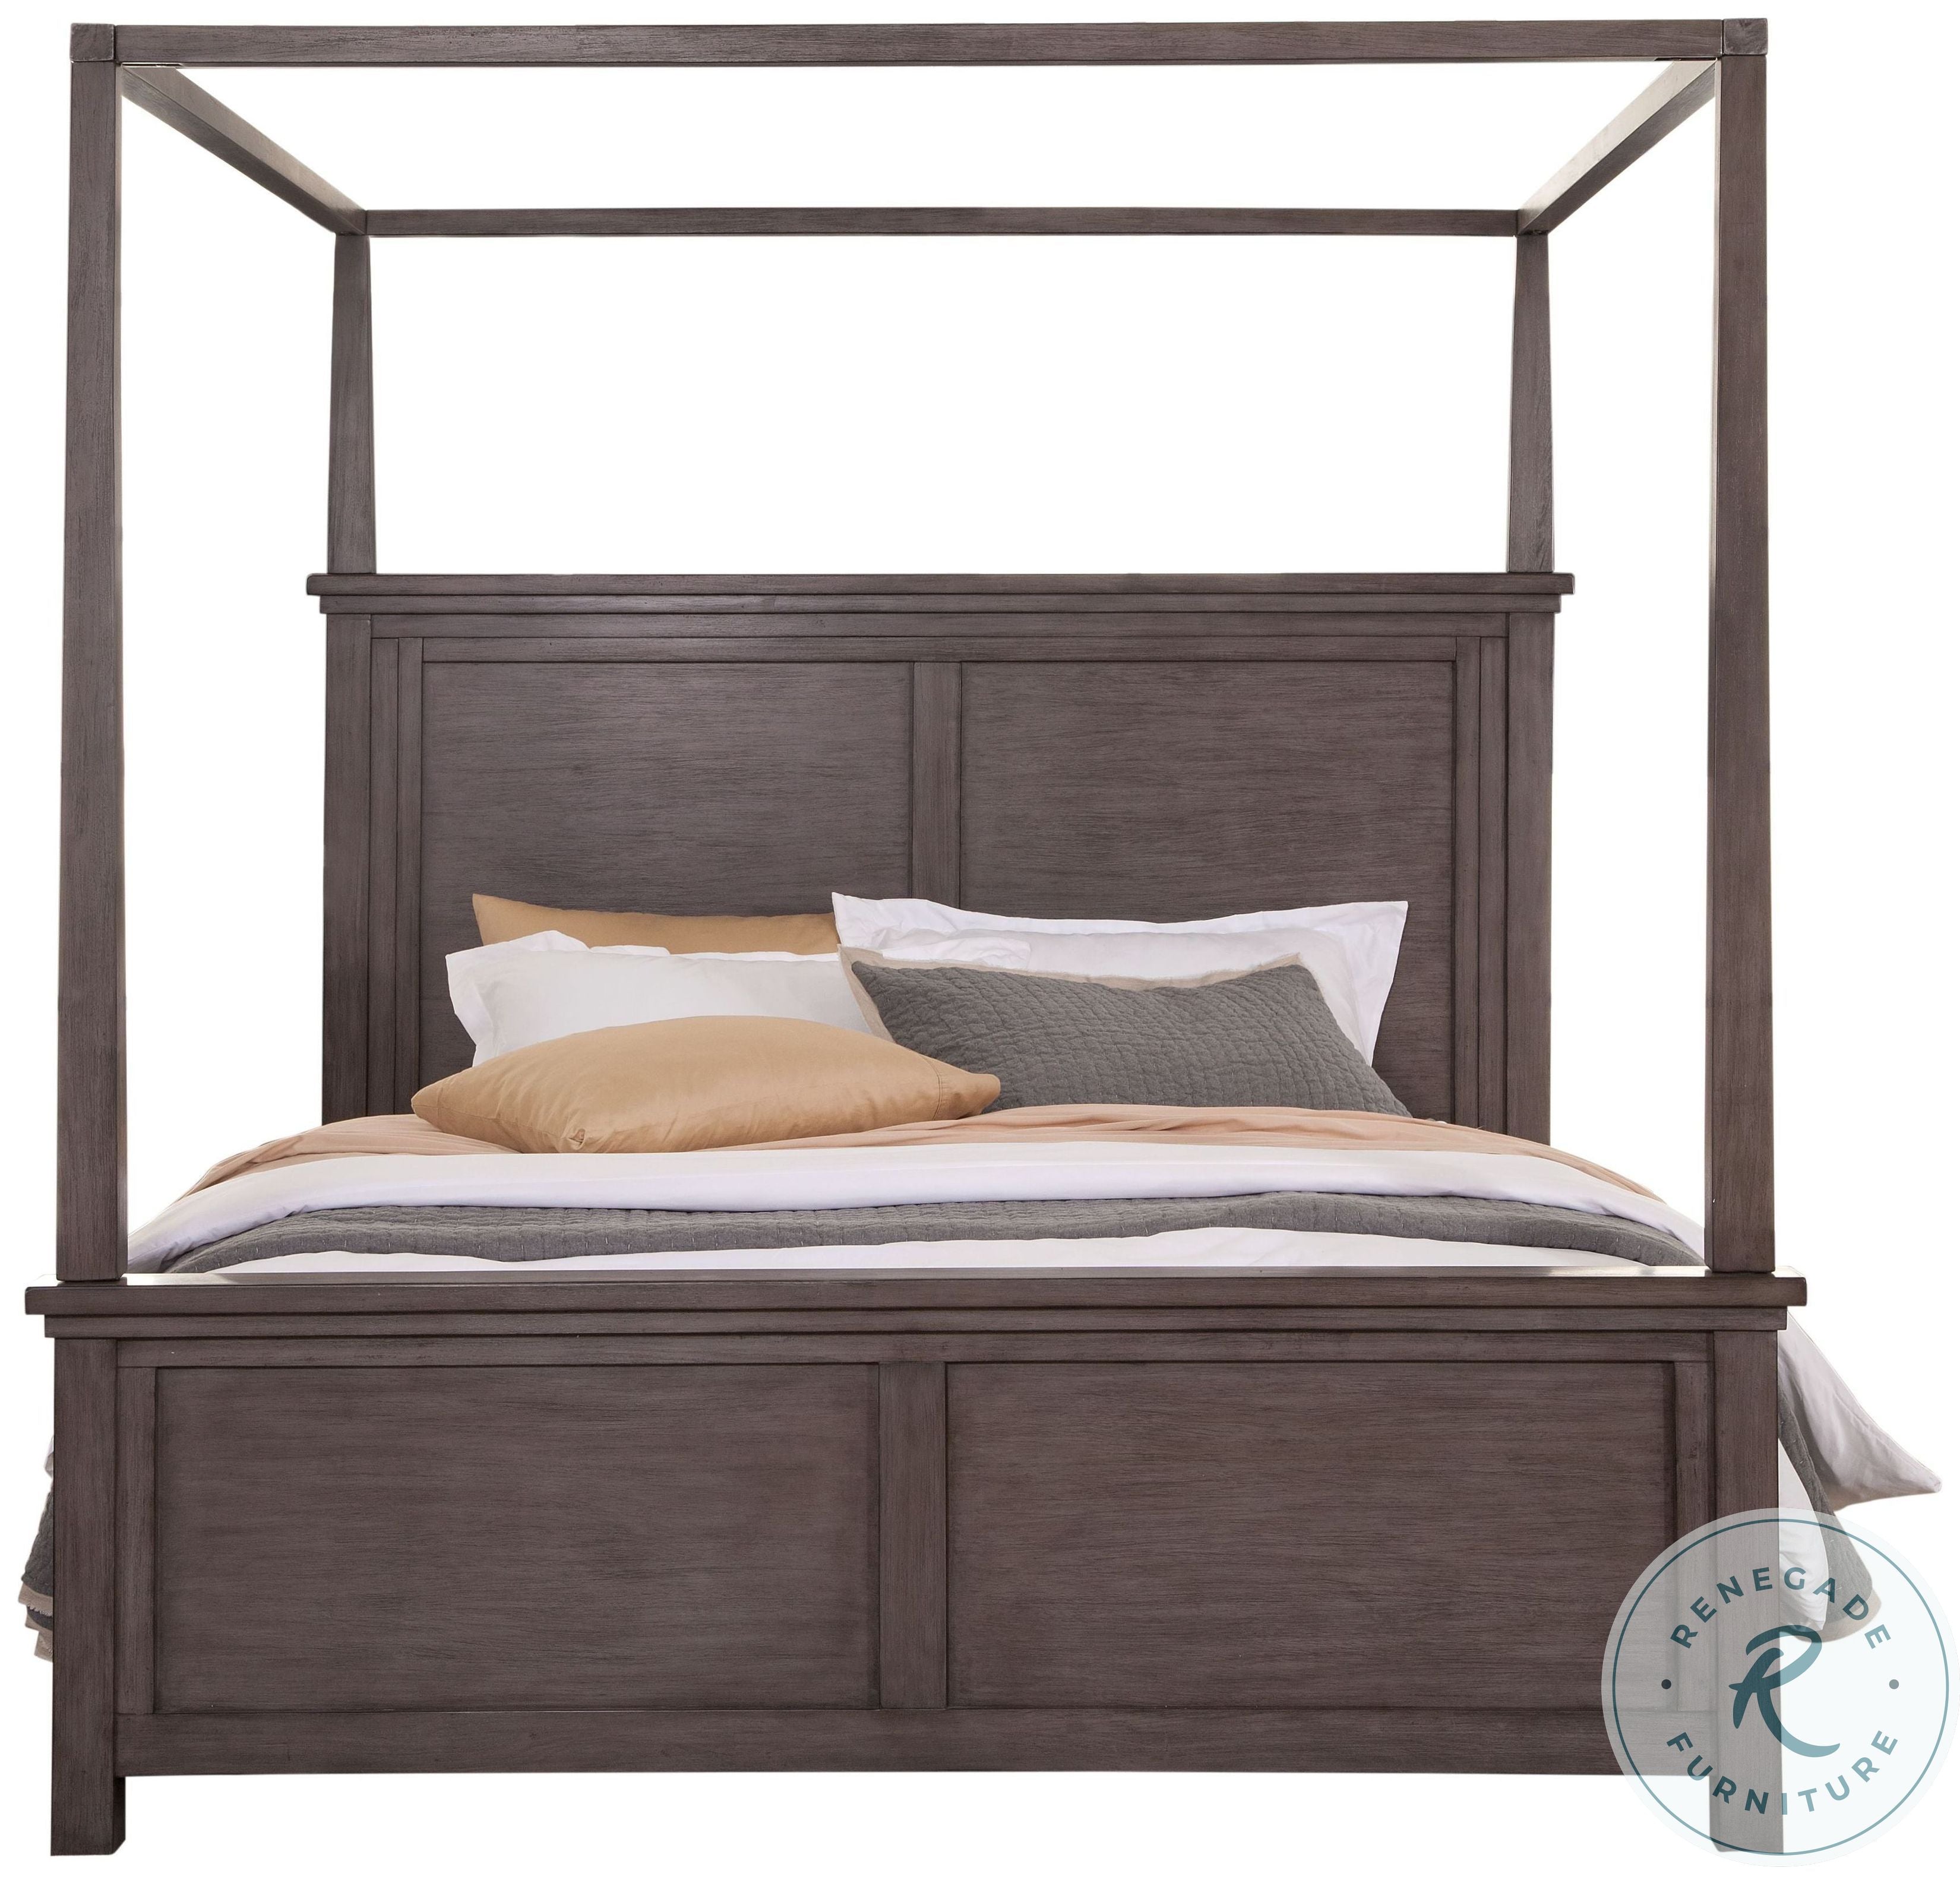 Modern Farmhouse Distressed Light Gray Queen Canopy Bed by Avalon Furniture